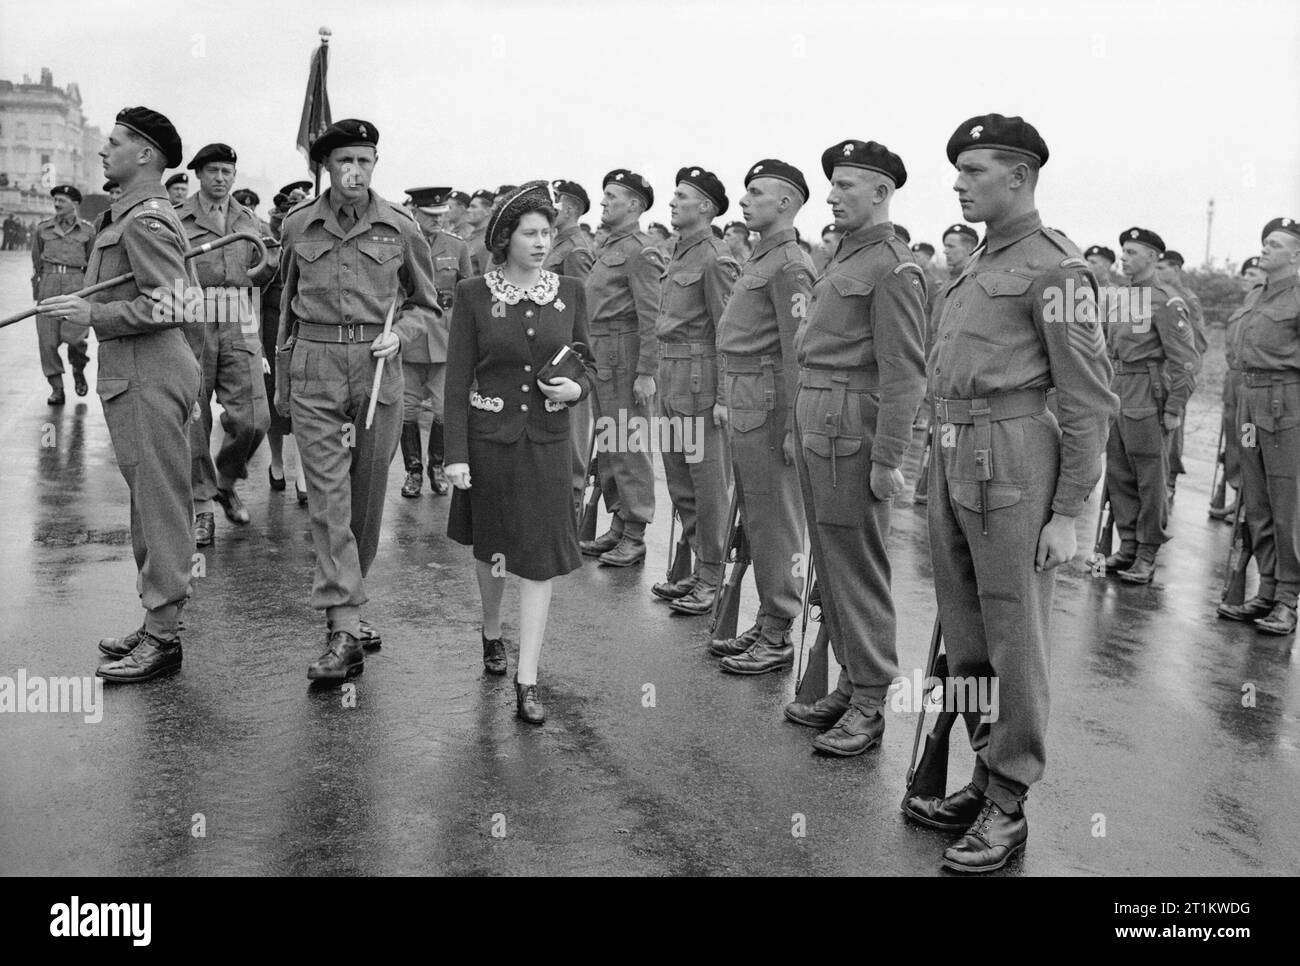 Allied Preparations For D-day Princess Elizabeth inspecting an honour guard during a Royal visit to 2nd (Armoured) Battalion Grenadier Guards, 5th Guards Armoured Brigade, Guards Armoured Division, at Hove, 17 May 1944. Stock Photo